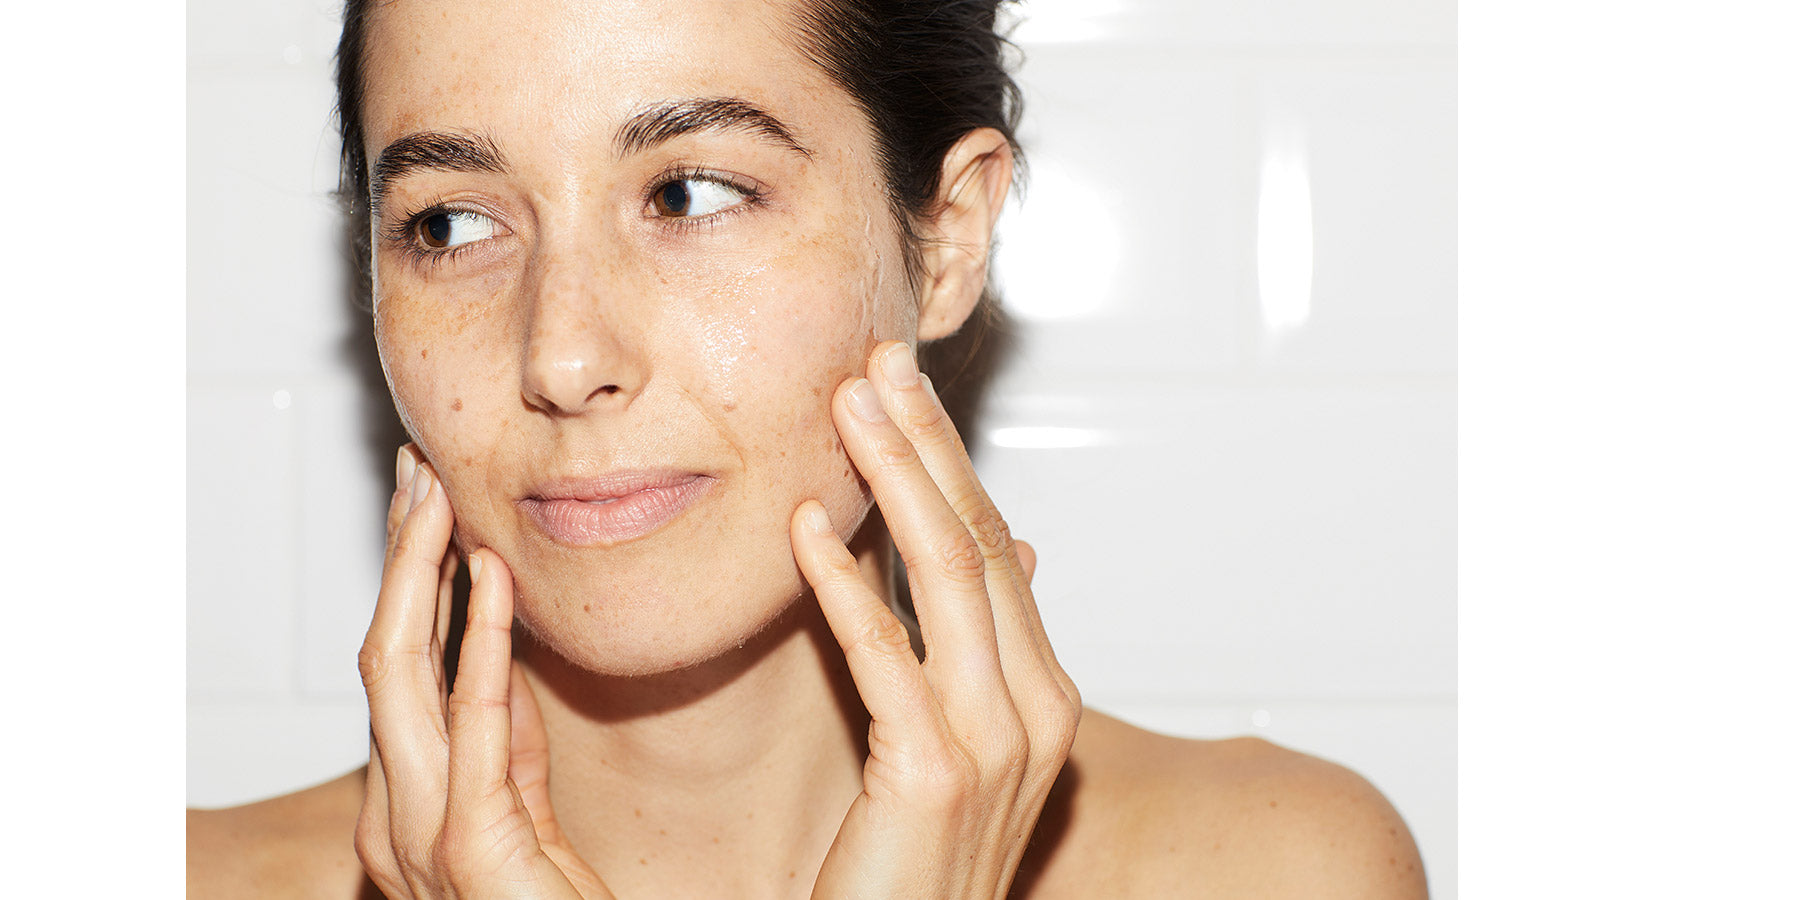 A complete routine for dry skin.